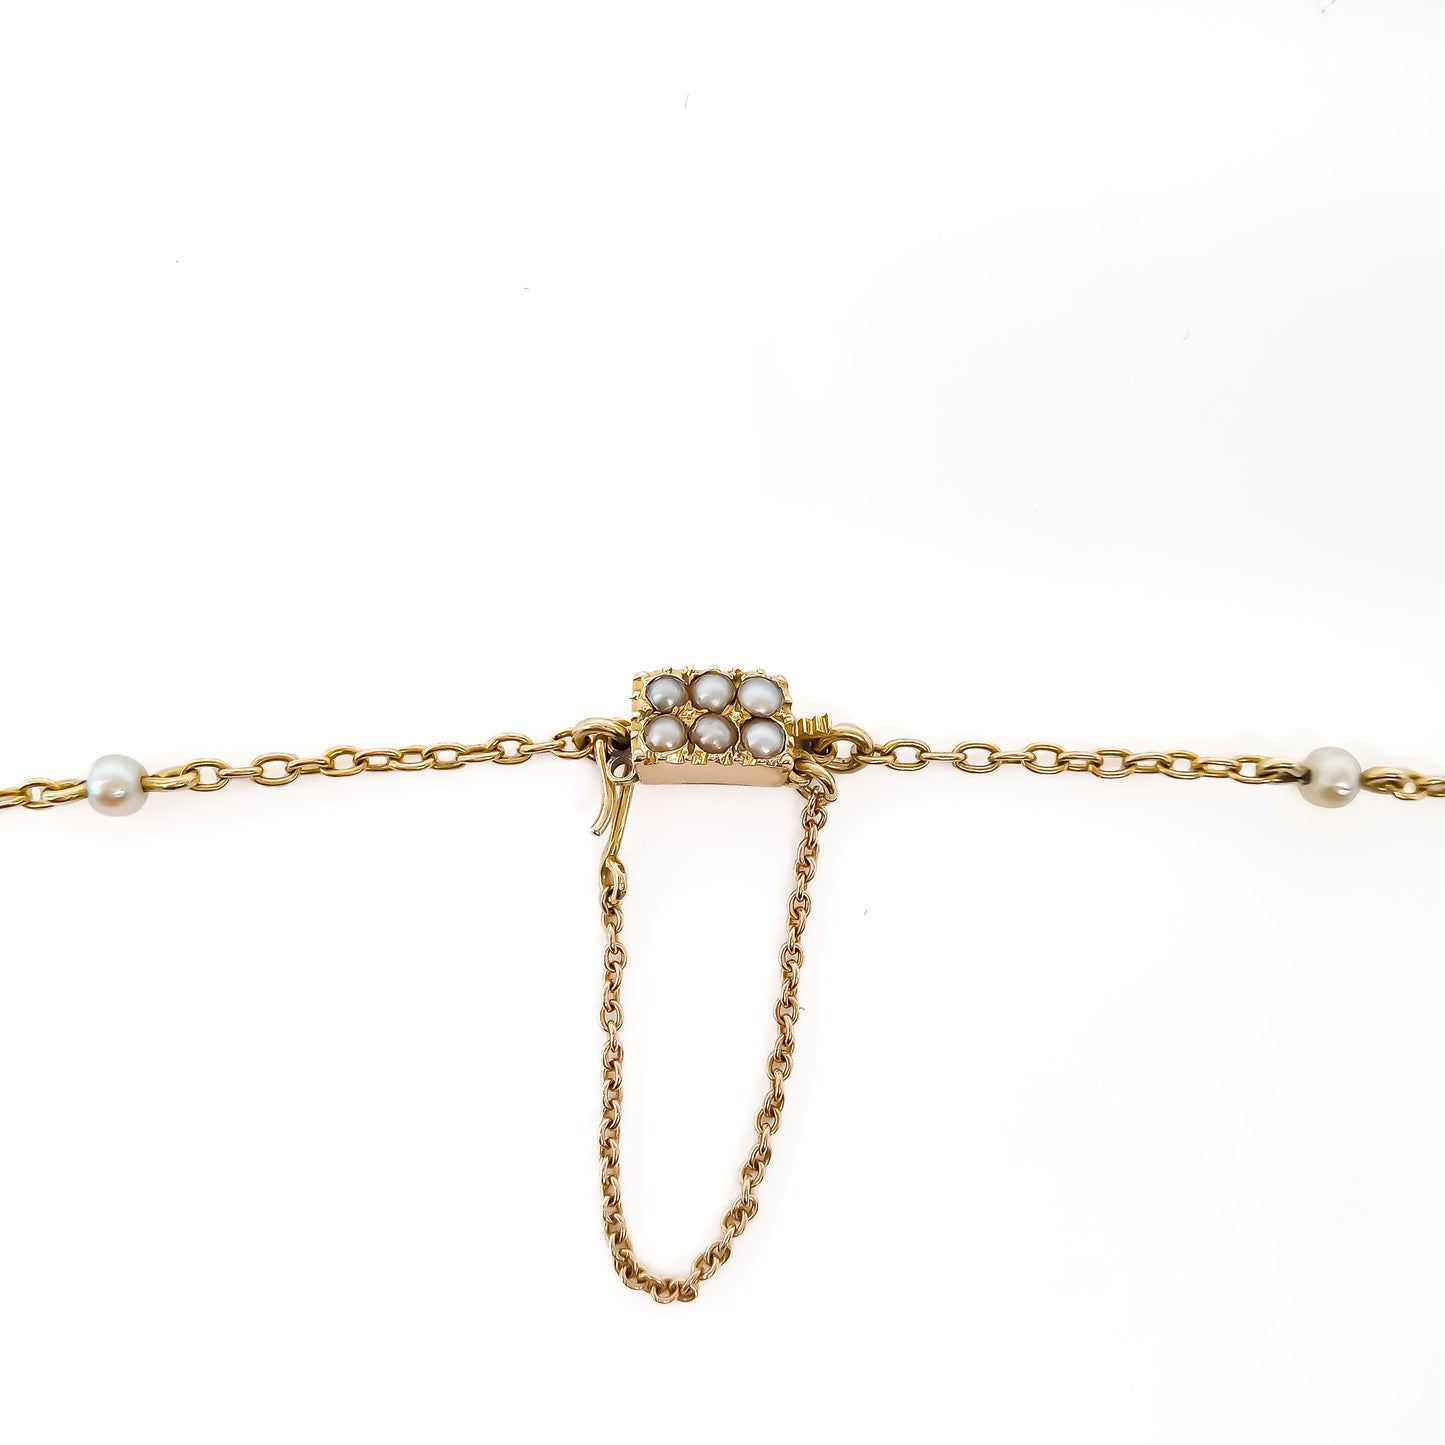 Stunning Edwardian 14ct yellow gold chain interspersed with graduating natural pearls and a larger pearl drop. Clasp attached to safety chain and set with six small seed pearls.